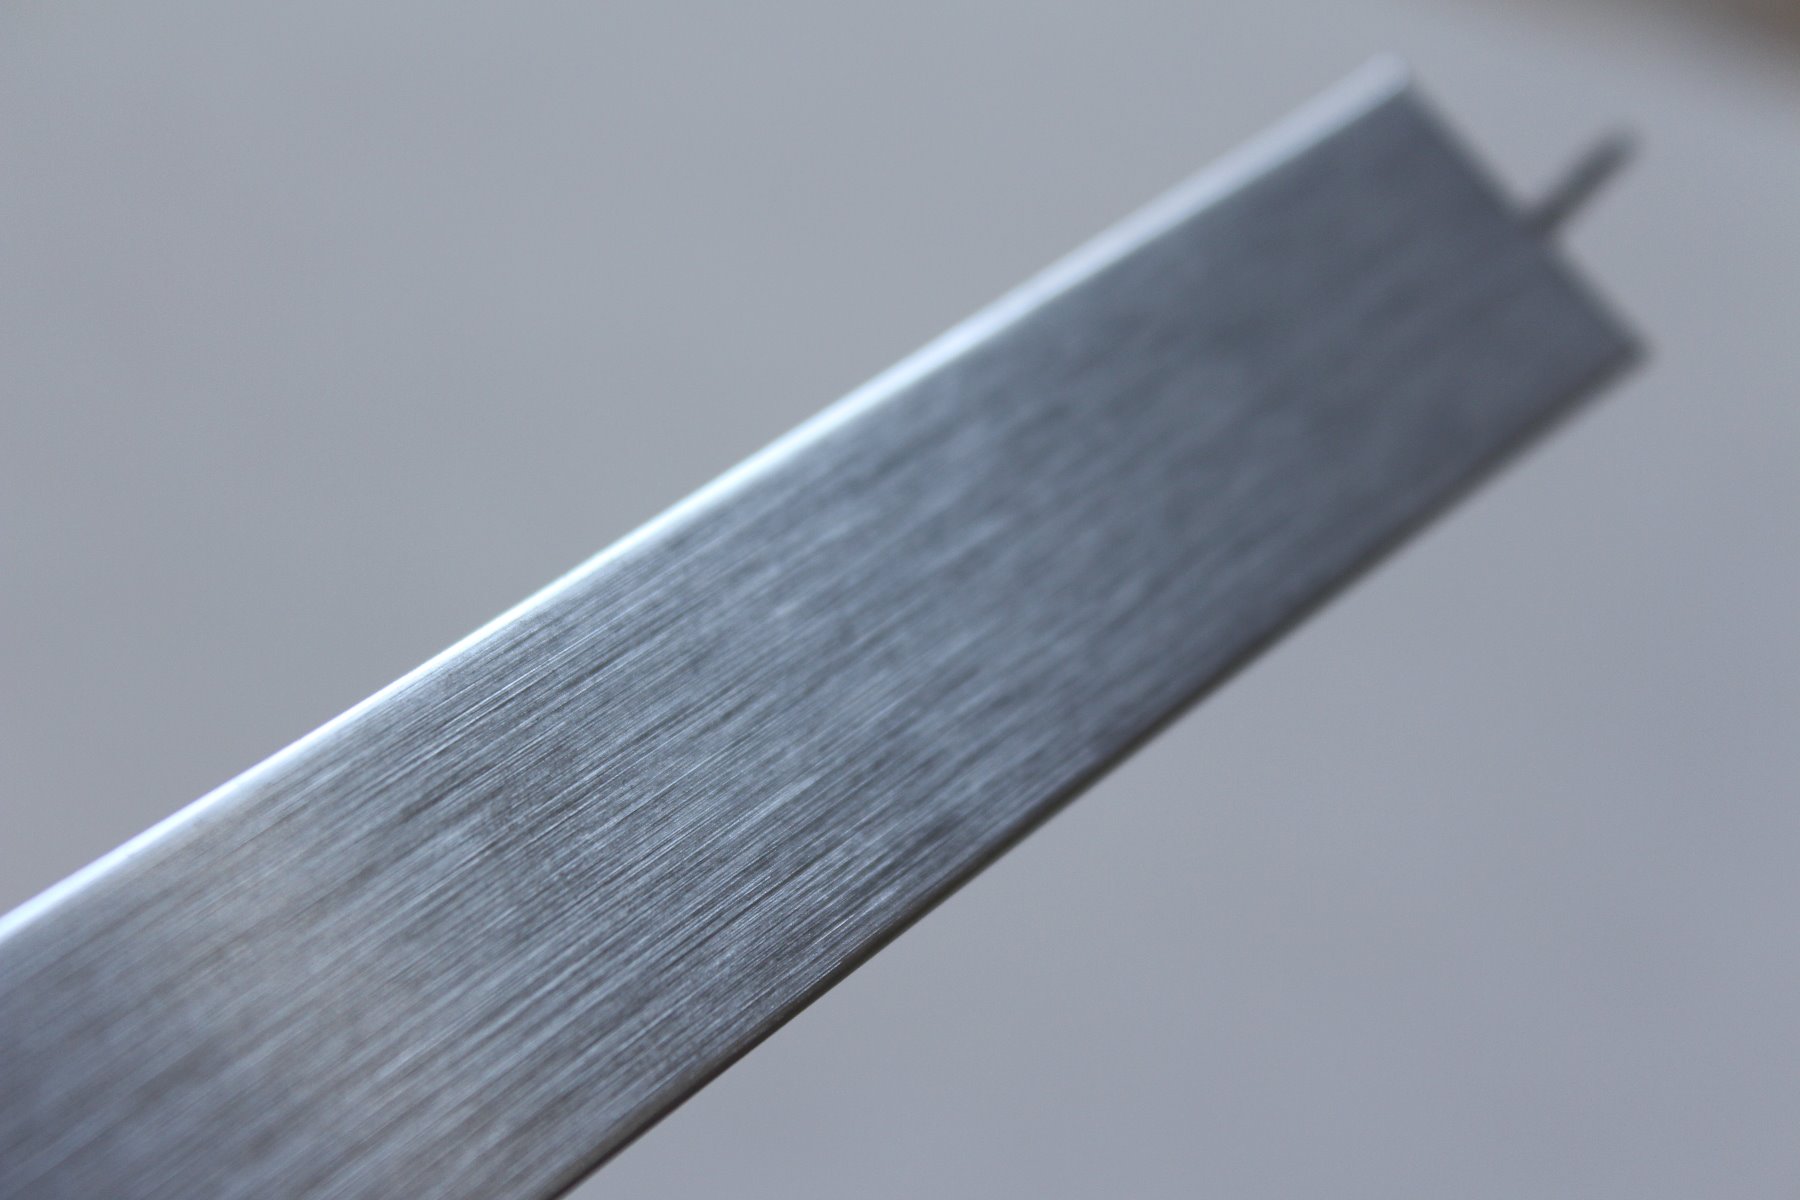 Brushed Chrome Cross Tee Section 1200mm X 24mm